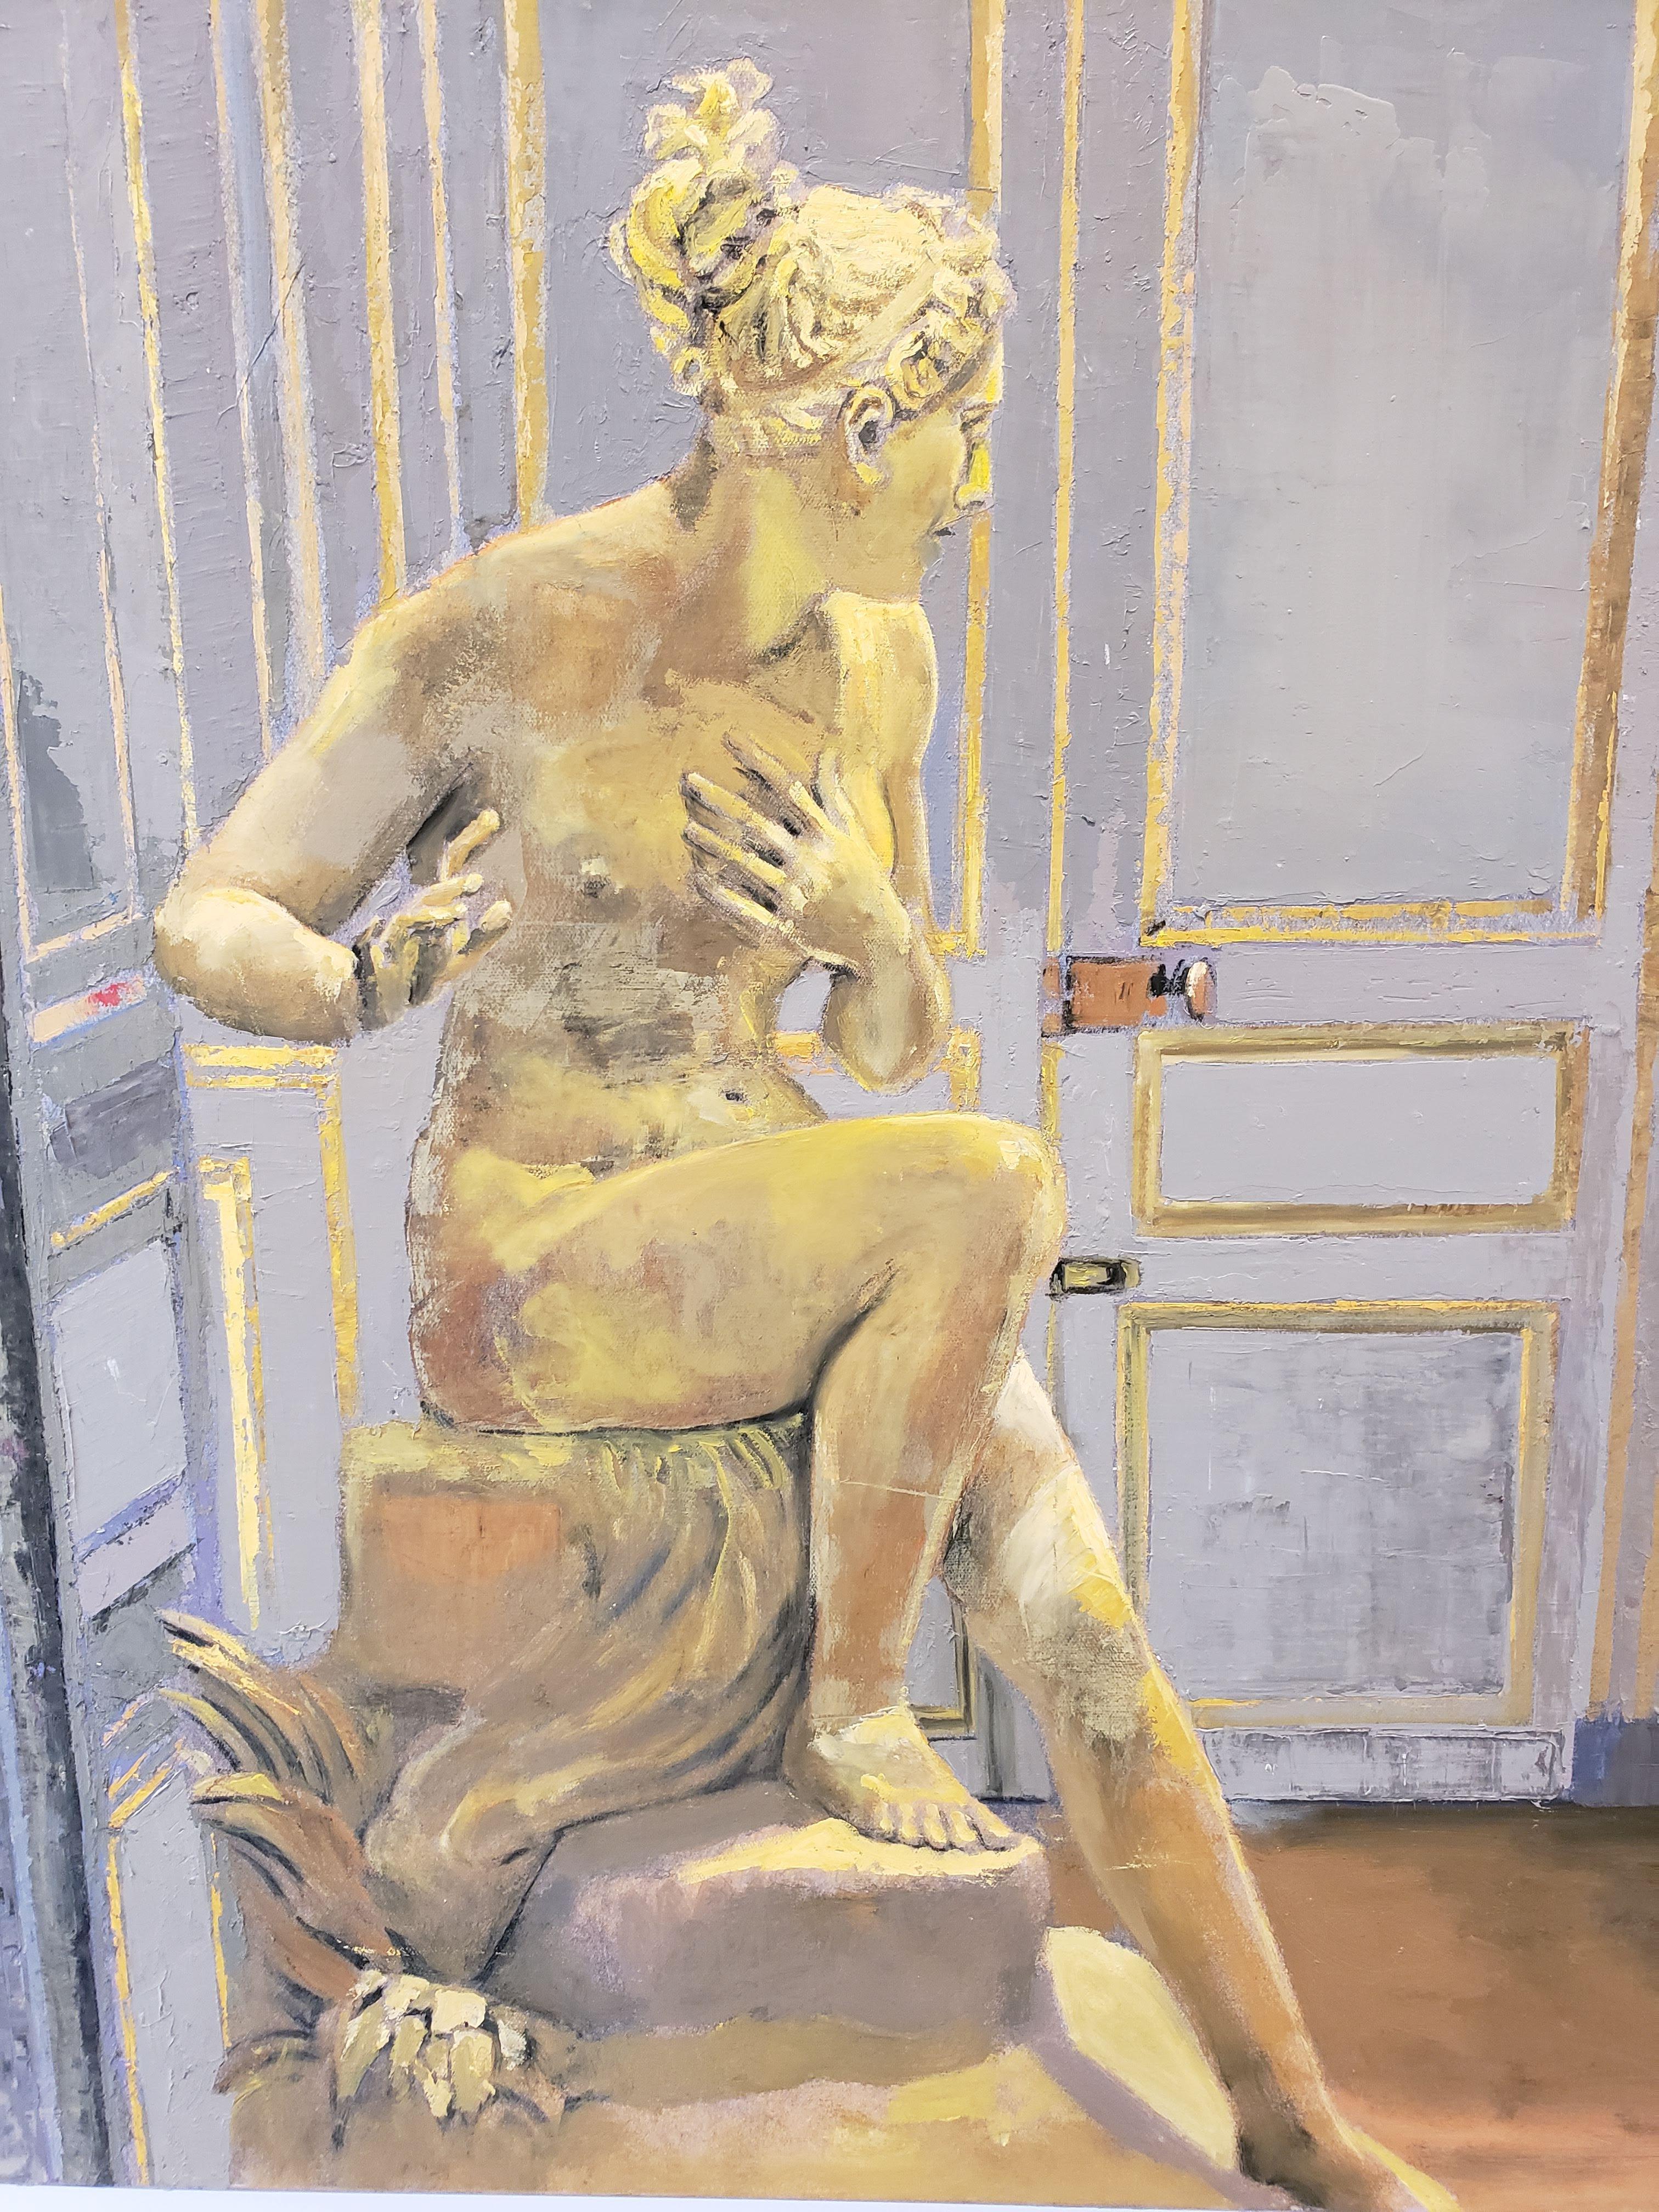 Portrait of statue of Diane in front of a doorway in the Louvre. Grey and gold coloring, with subject looking back into the corner of the room. 

Patrick Pietropoli was a teacher of political studies for several years before becoming a professional